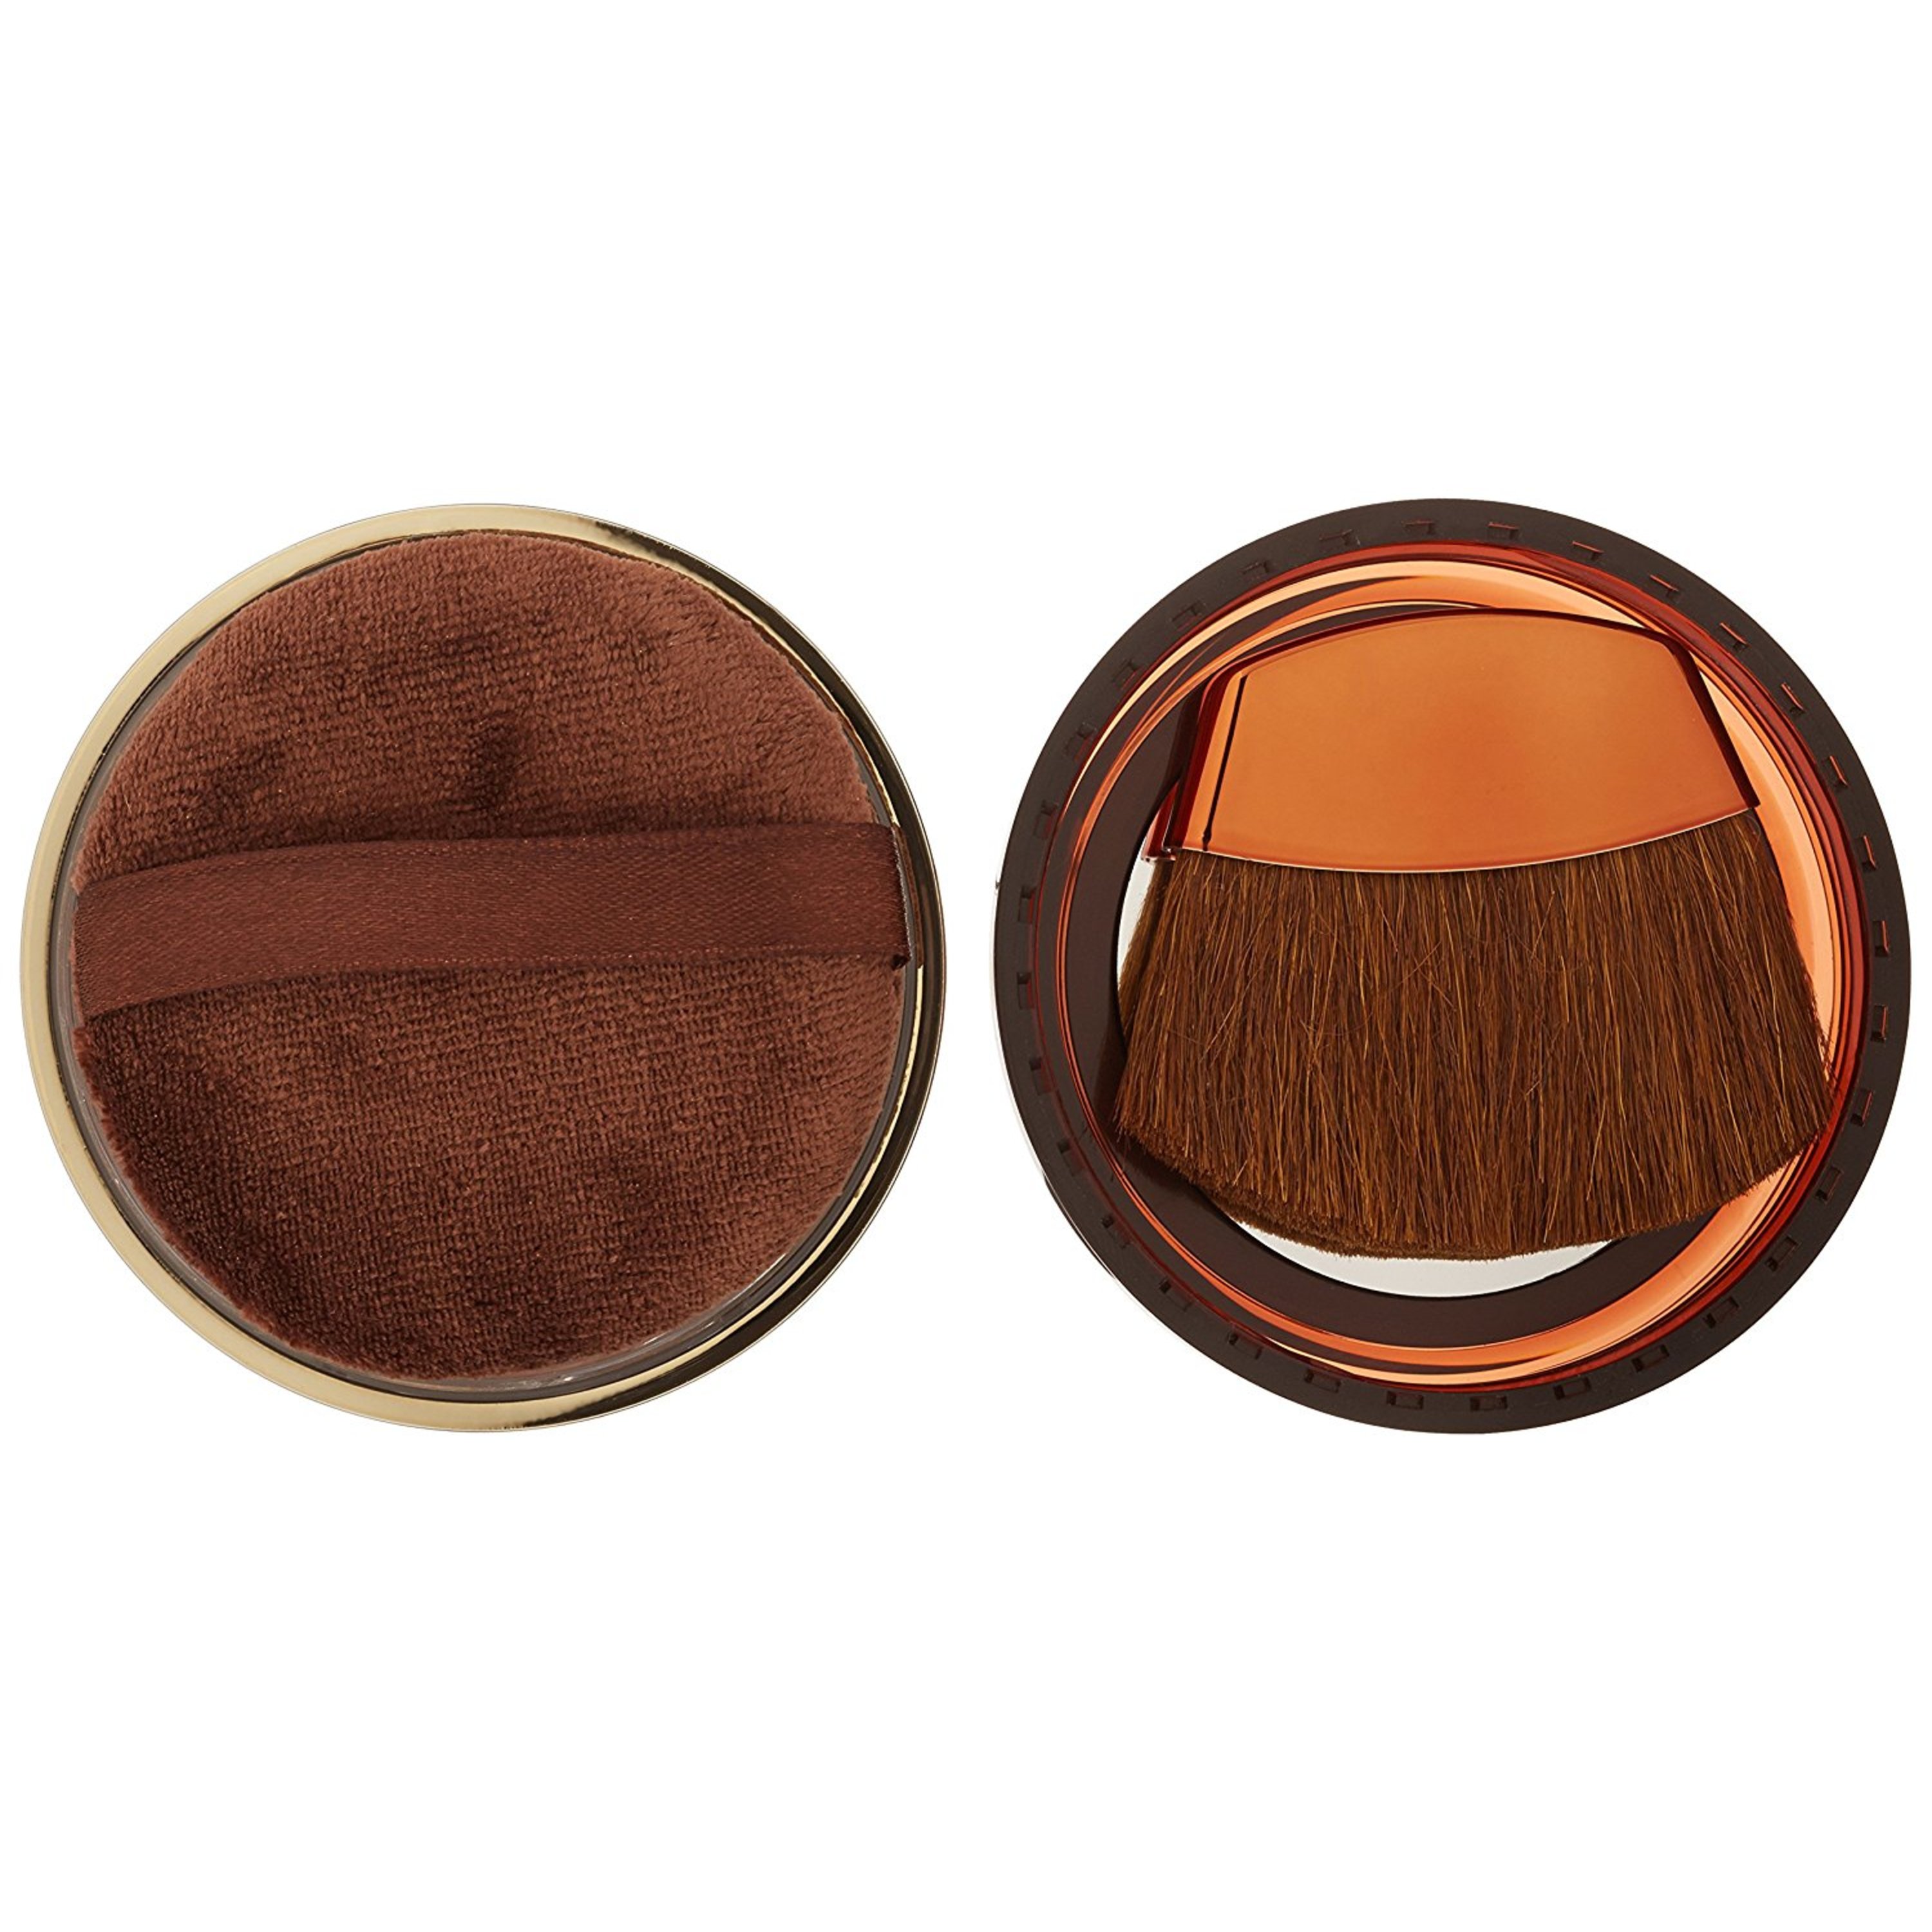 Physicians Formula Bronze Booster Glow-Boosting Sun Stones, Light to Medium - image 2 of 5